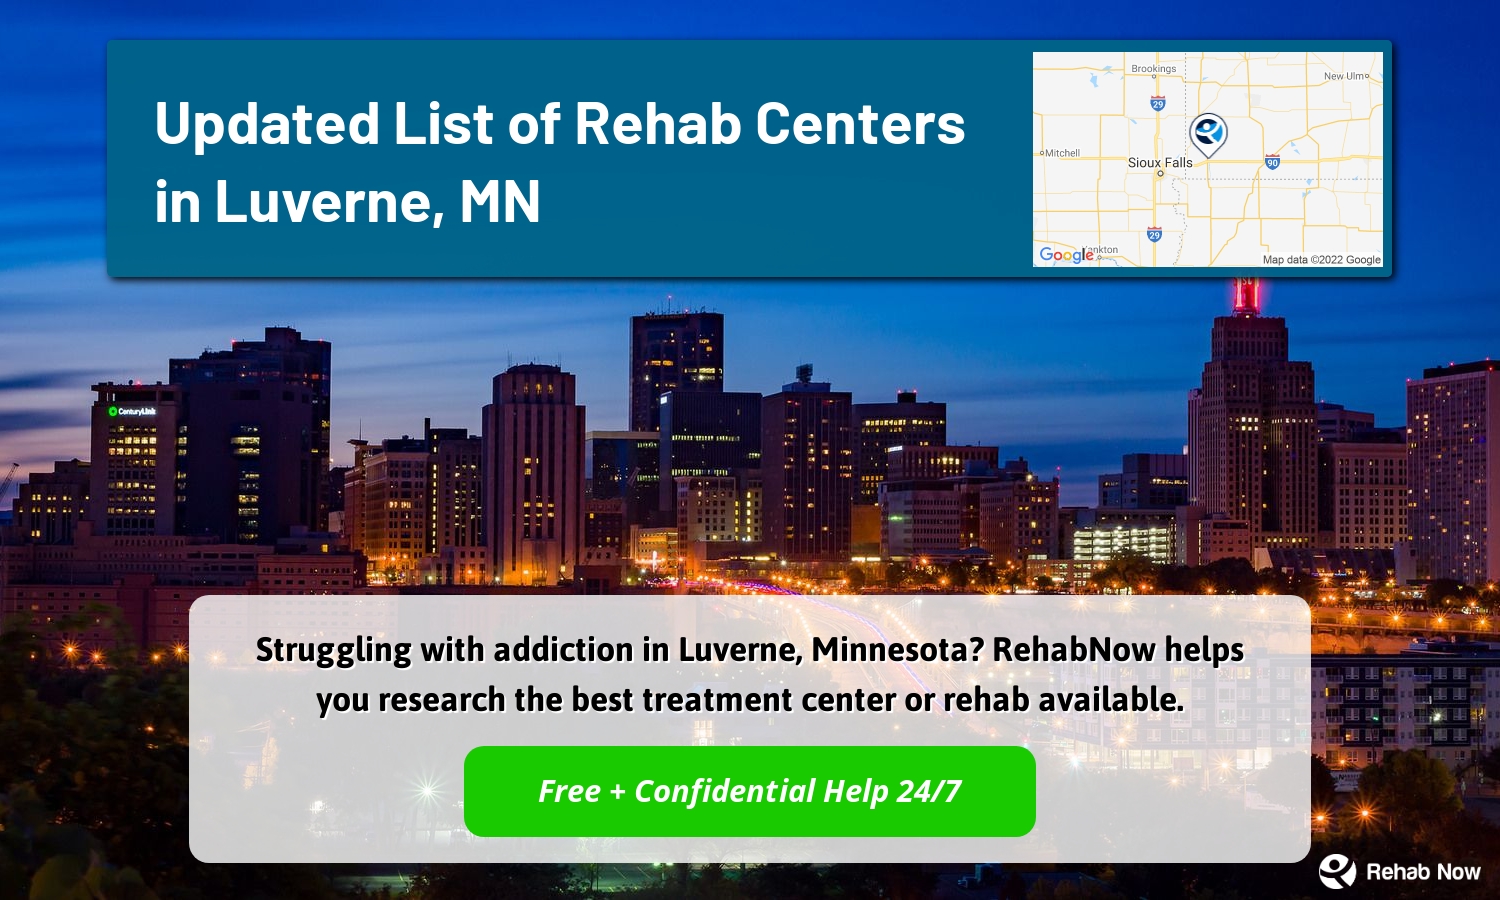 Struggling with addiction in Luverne, Minnesota? RehabNow helps you research the best treatment center or rehab available.